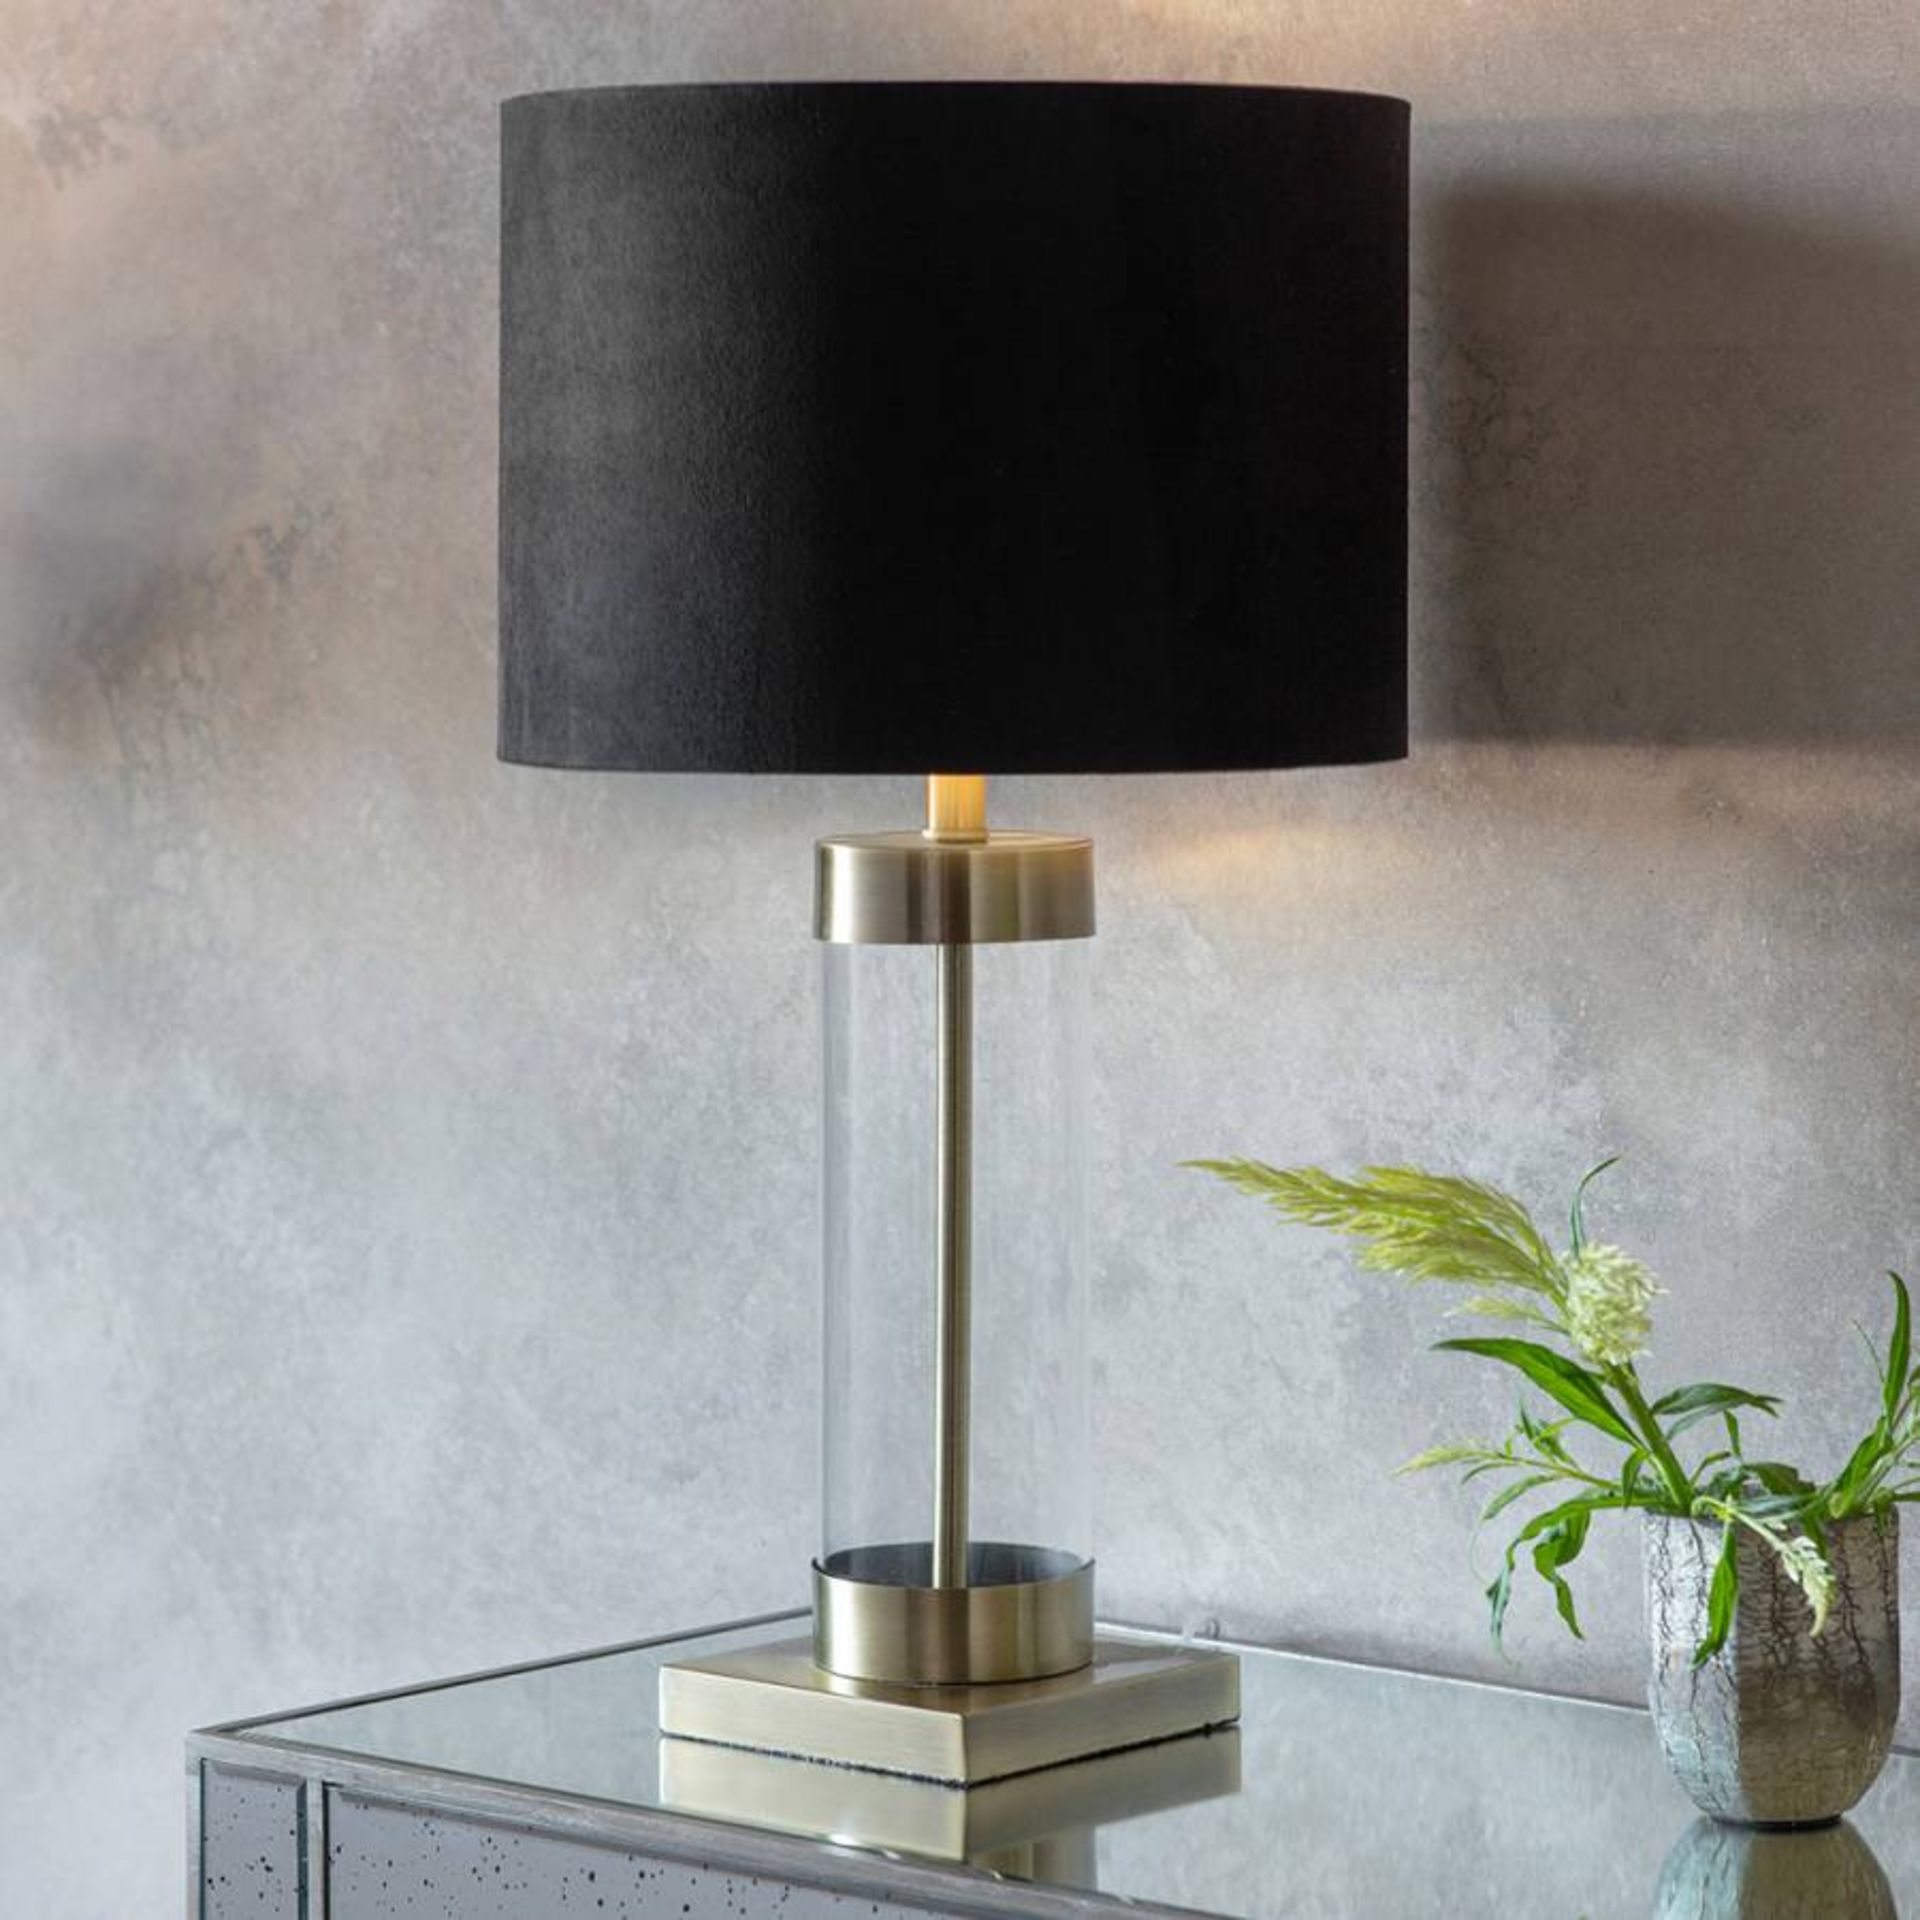 Villero Table Lamp Light up any room in your home with this chic & stylish table lamp constructed in